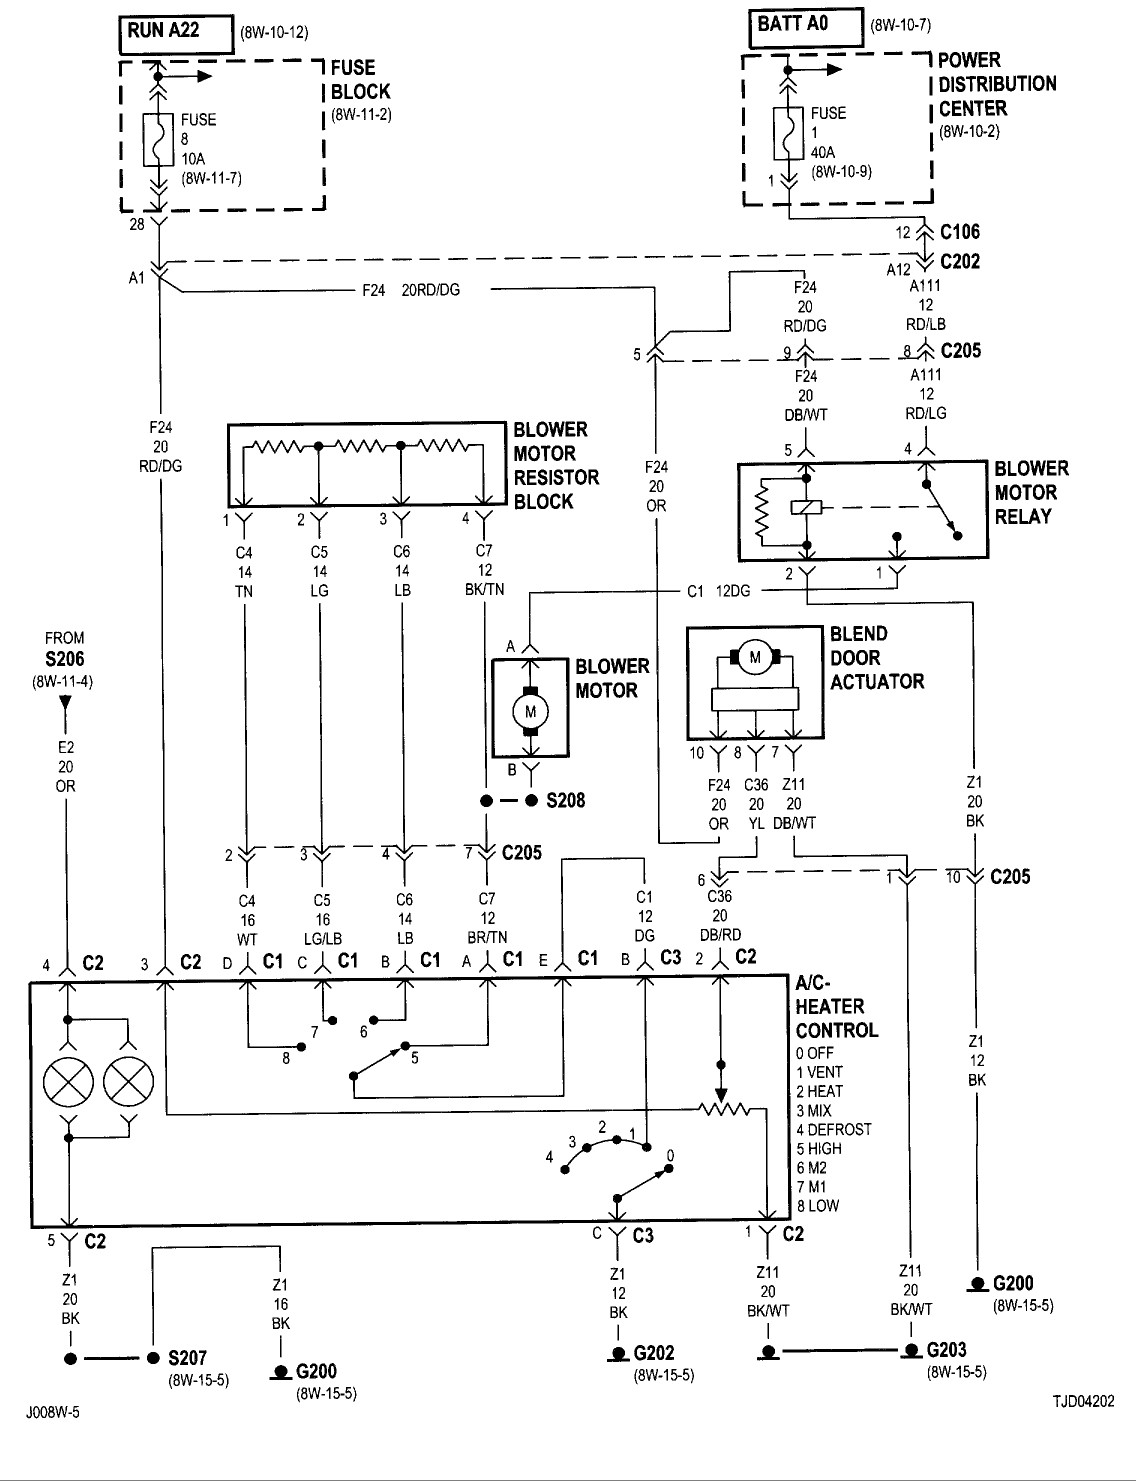 2001 Jeep Wrangler Wiring Diagram from mainetreasurechest.com